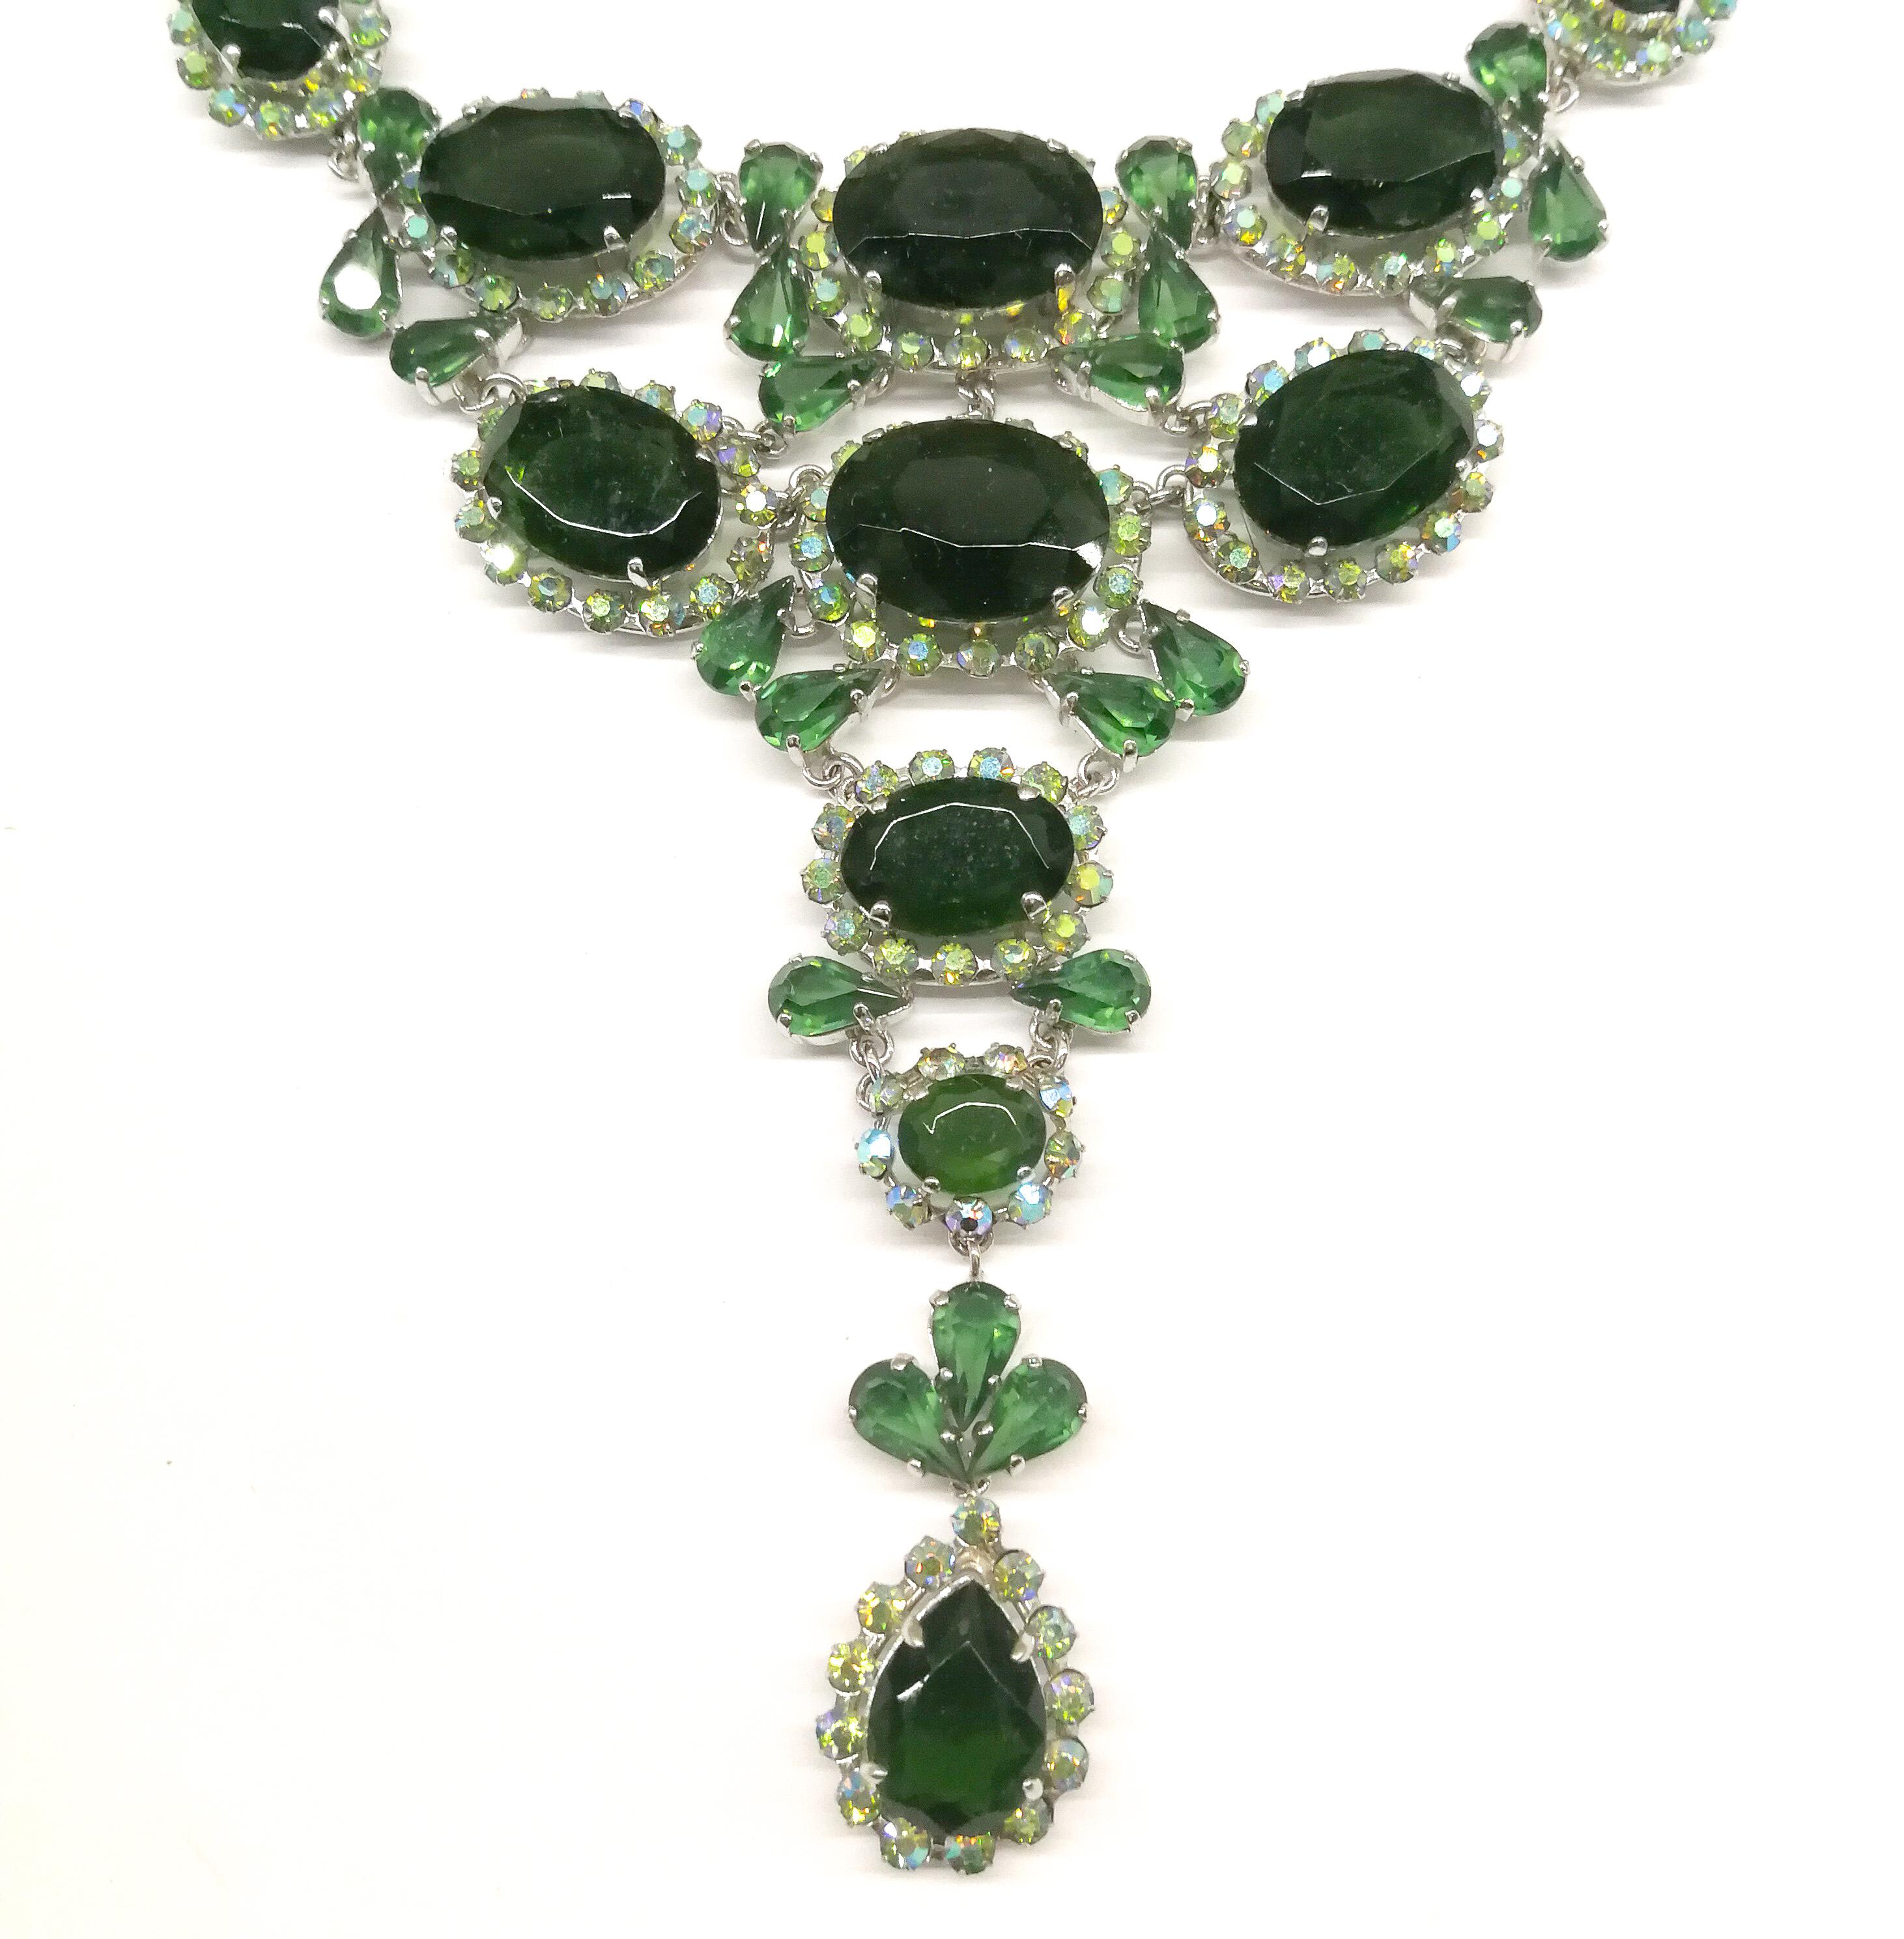 A very rare and spectacular necklace and earrings, made by Henkel and Grosse for Christian Dior from January, 1957. The iconic necklace and earrings are rarely seen together. A sumptuous and dramatic necklace is made with oval green tourmaline